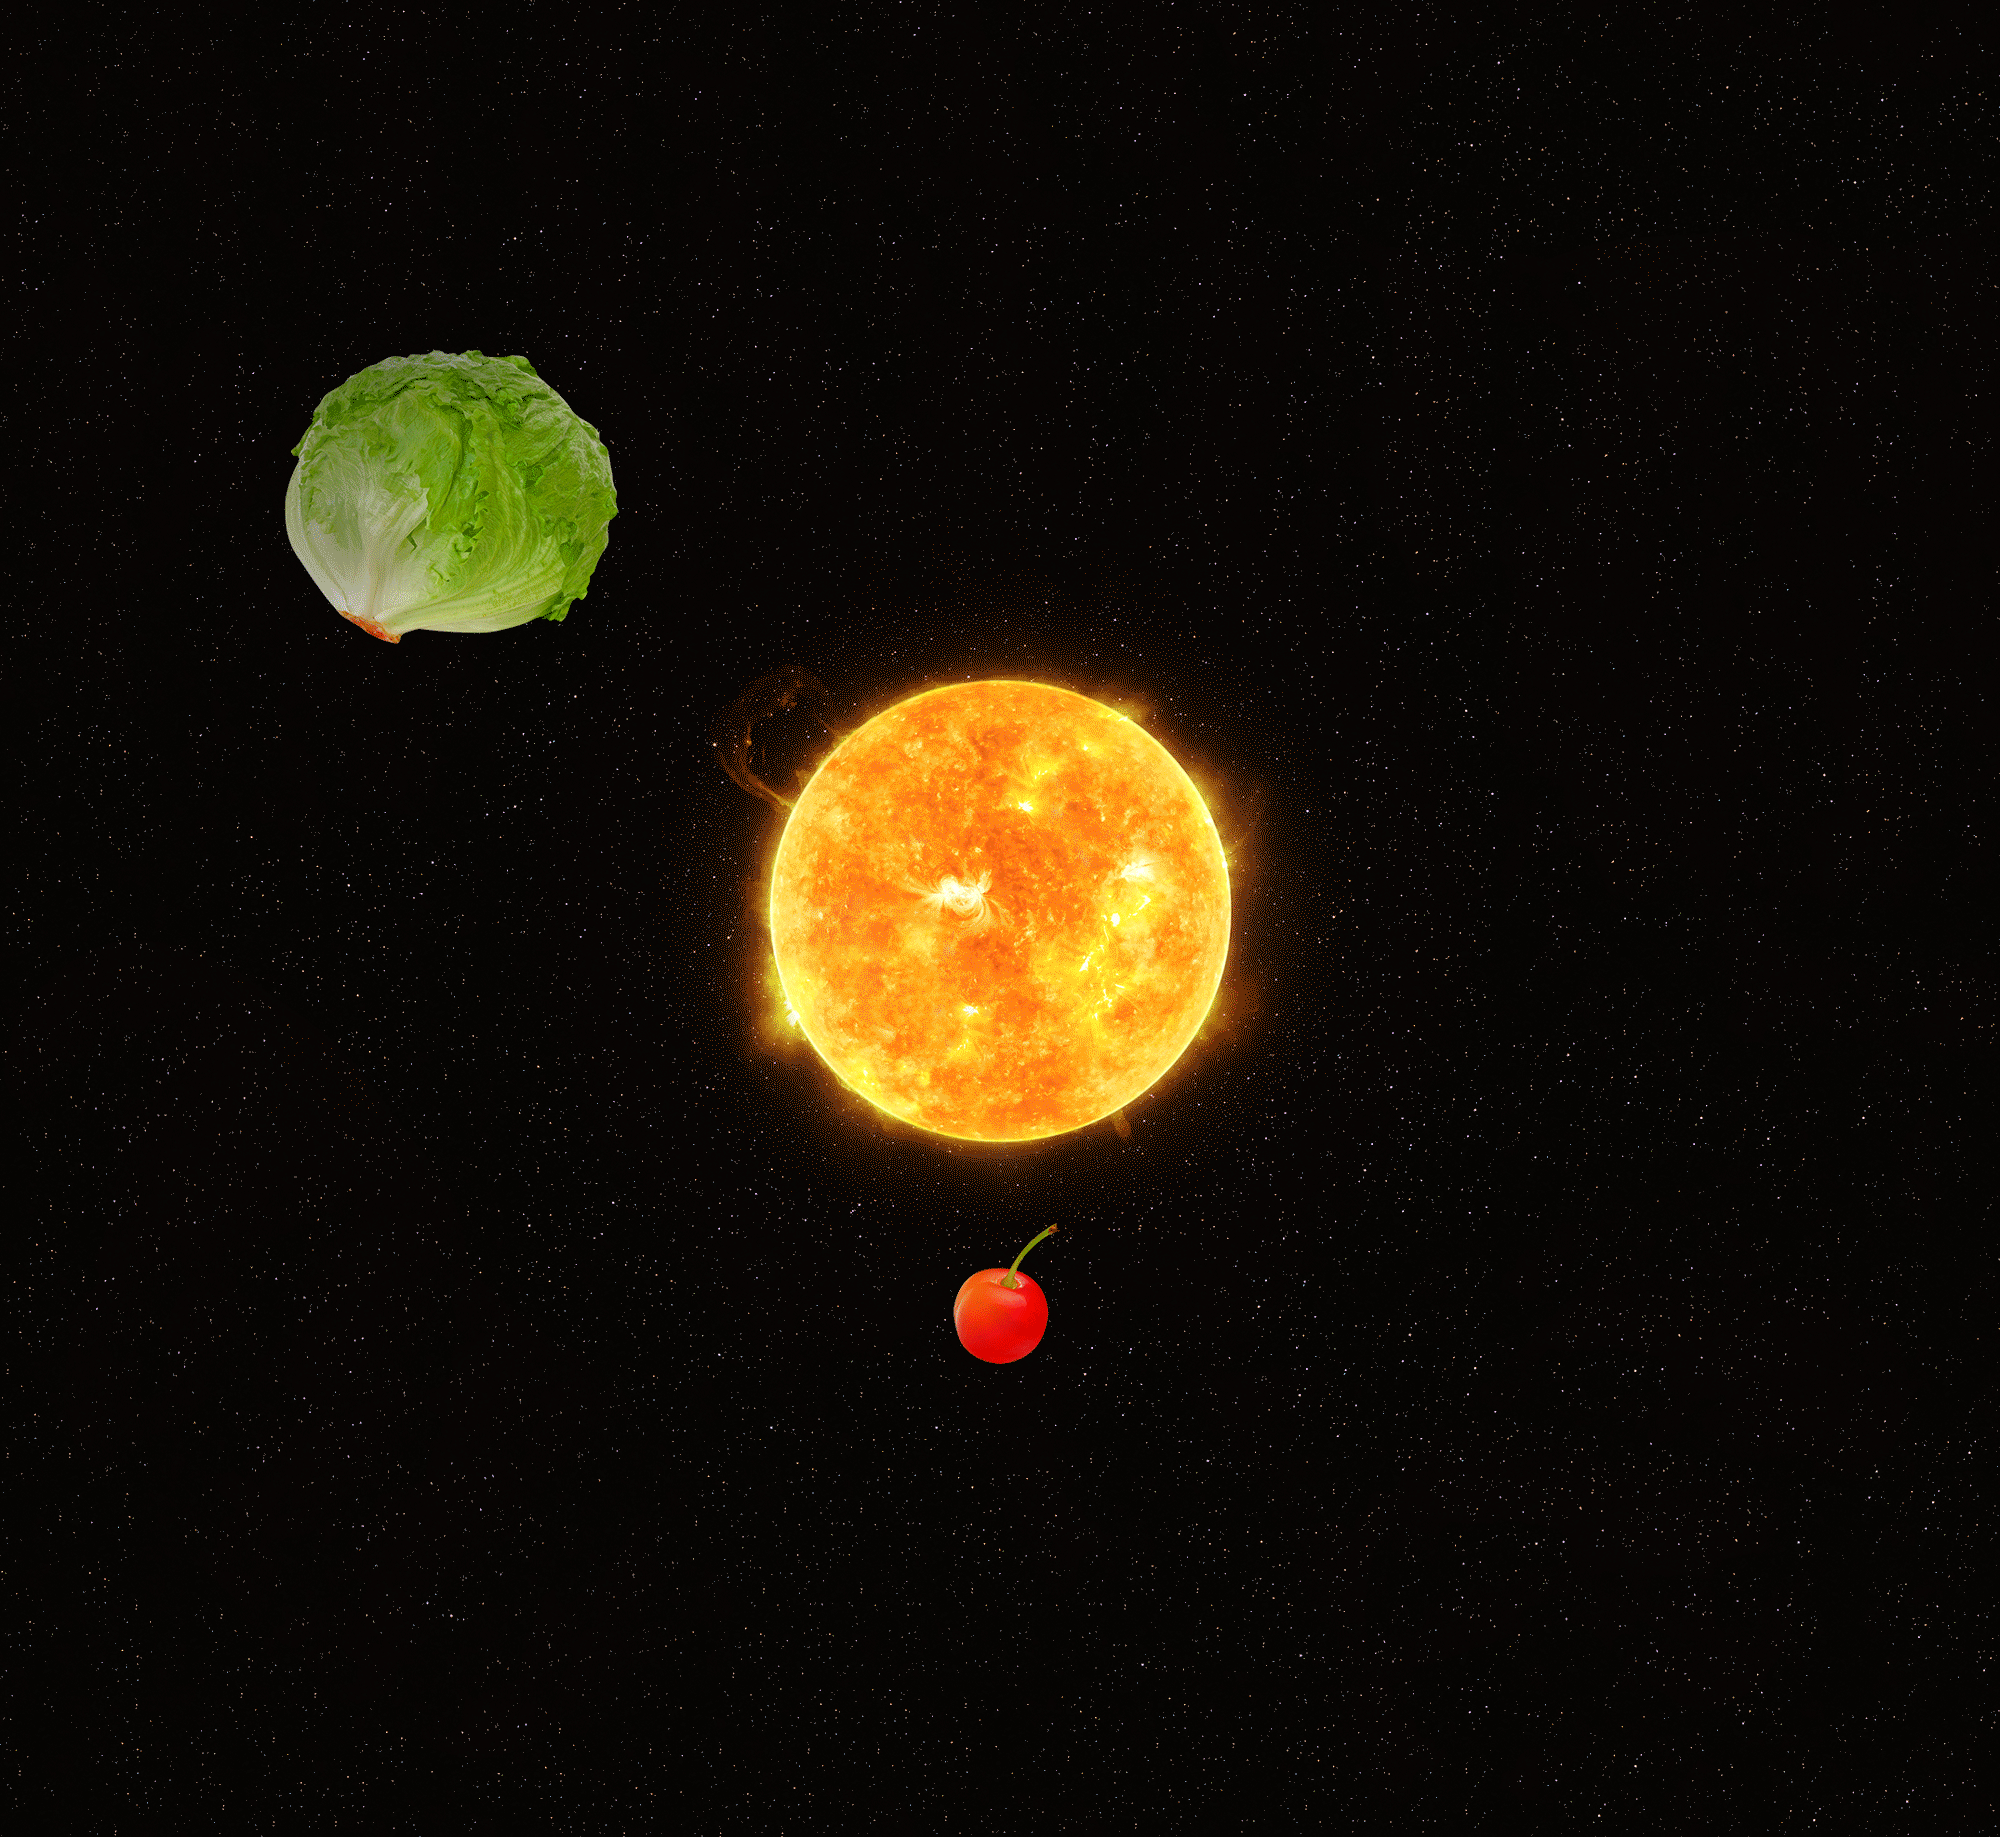 Animation of a head of lettuce and a cherry orbiting the Sun